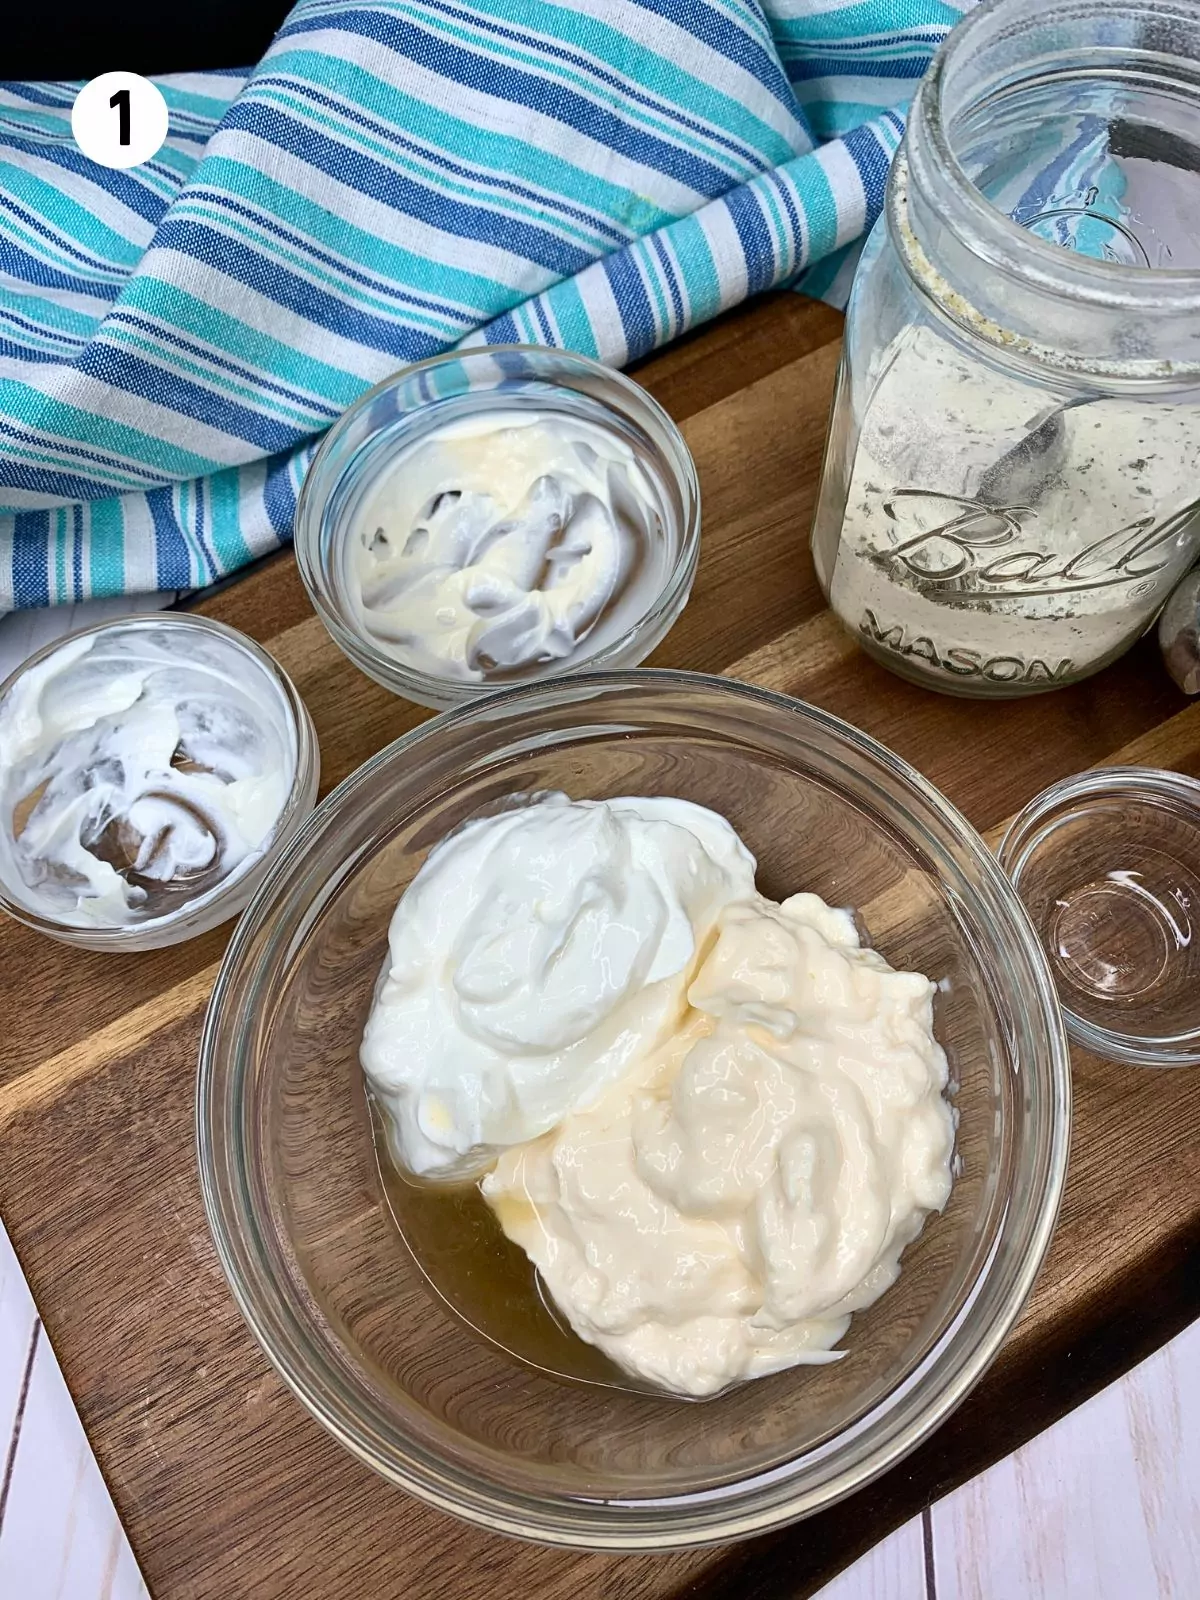 sour cream and mayonnaise in glass bowl.